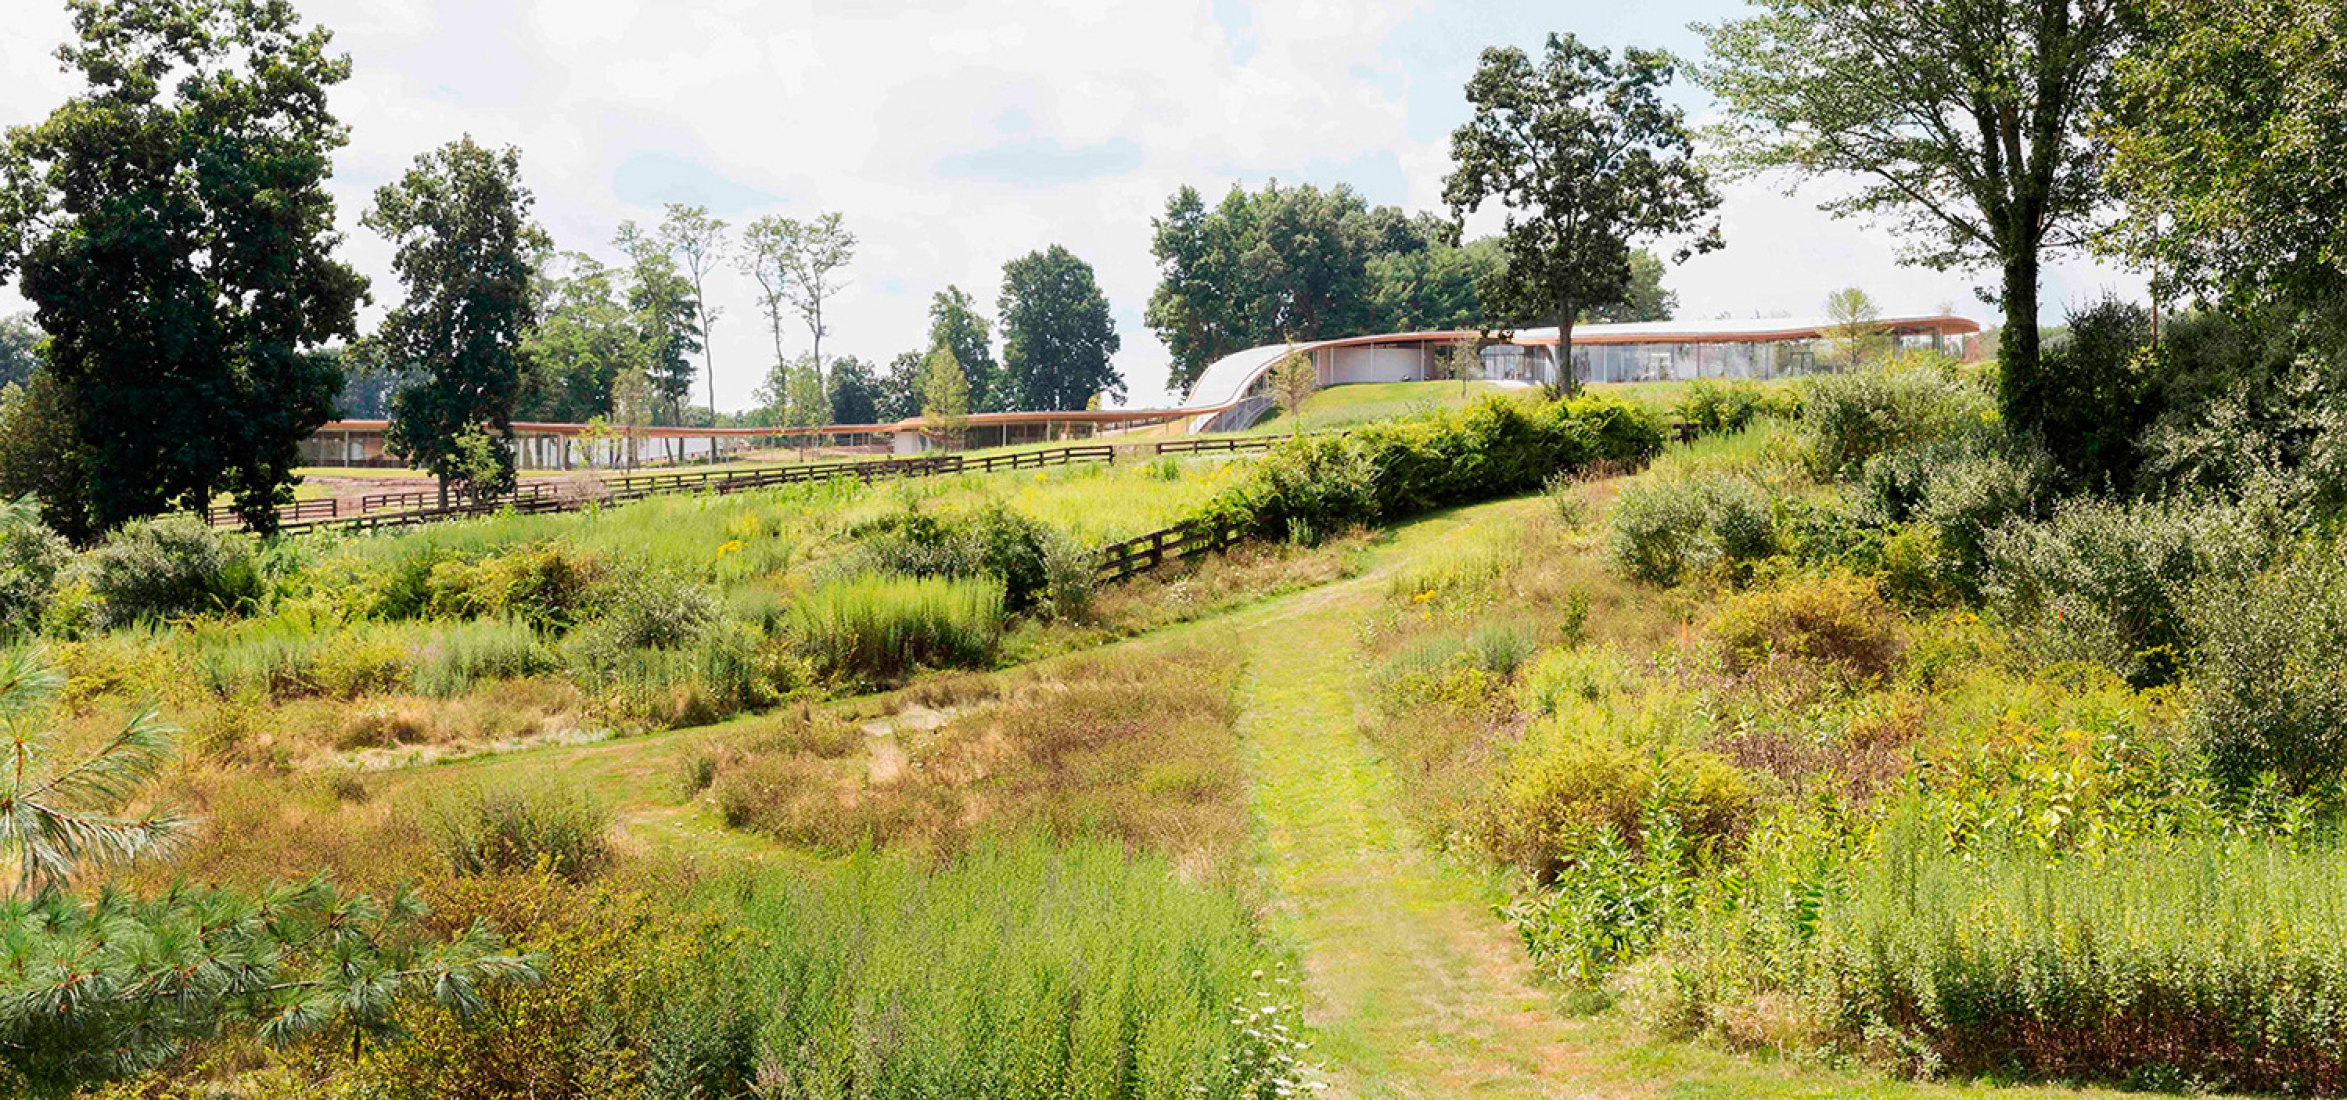 SANAA's meandering river building at Grace Farms. Photography © Dean Kaufman. 